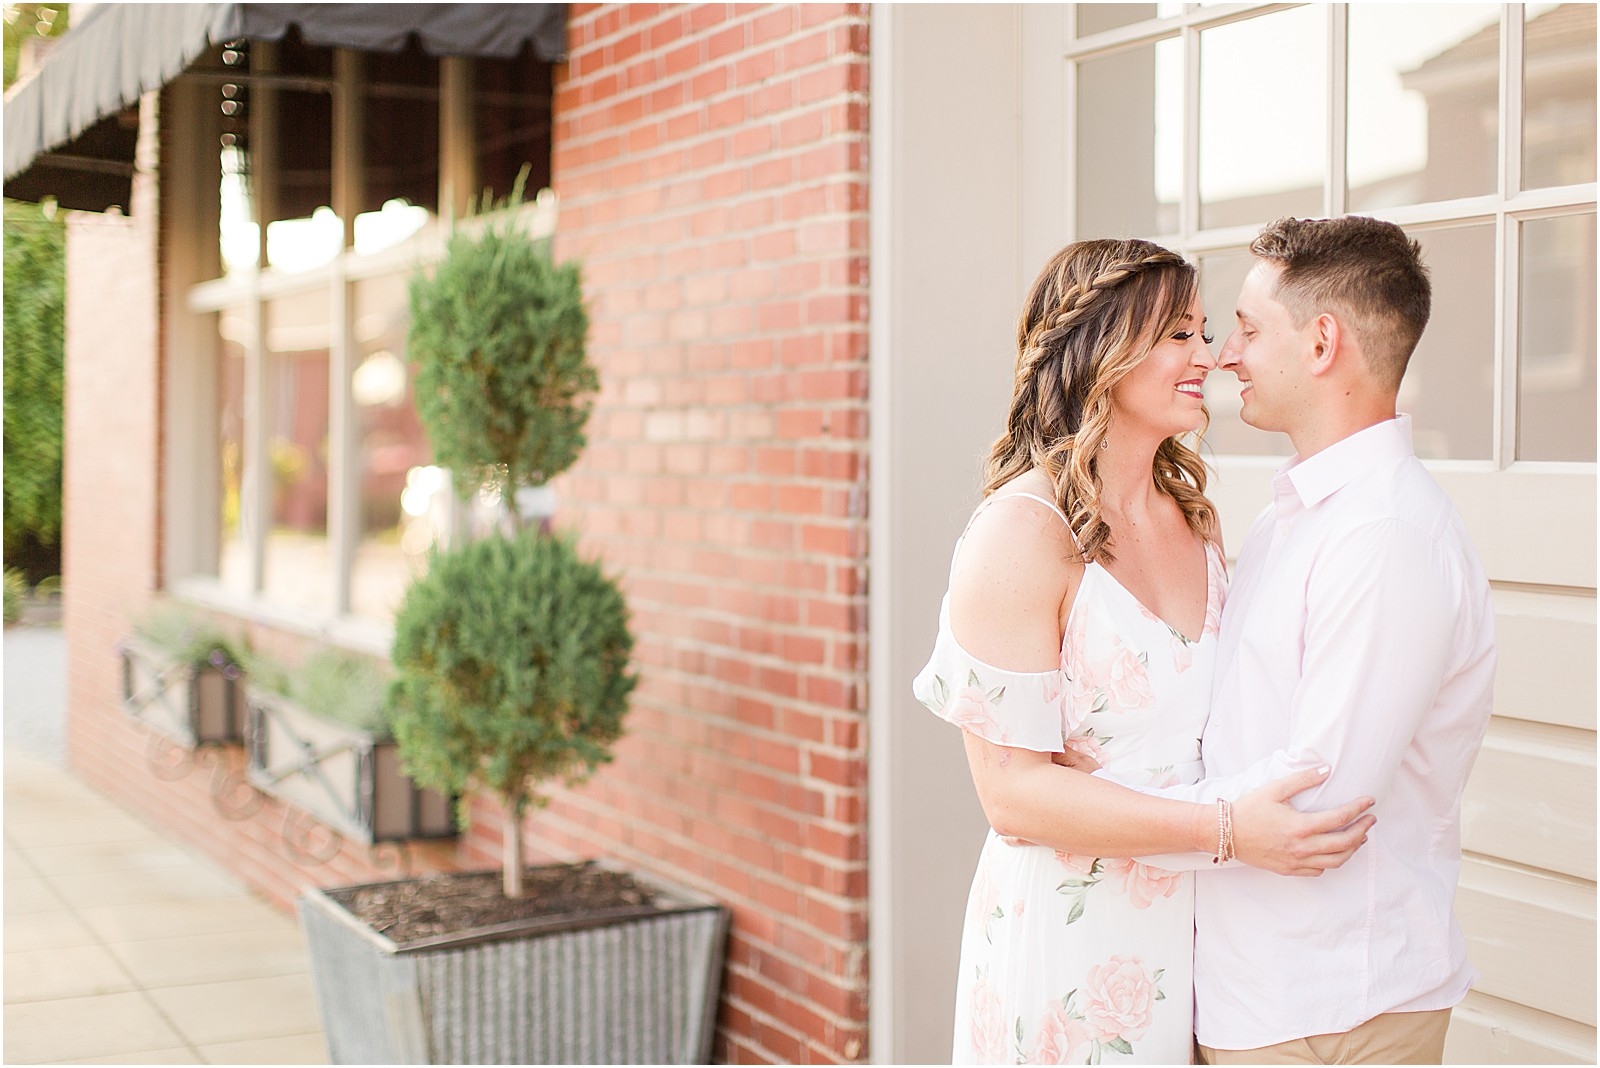 20 West Downtown Newburgh Anniversary Session | Katie and Bobby | Bret and Brandie Photography 002.jpg